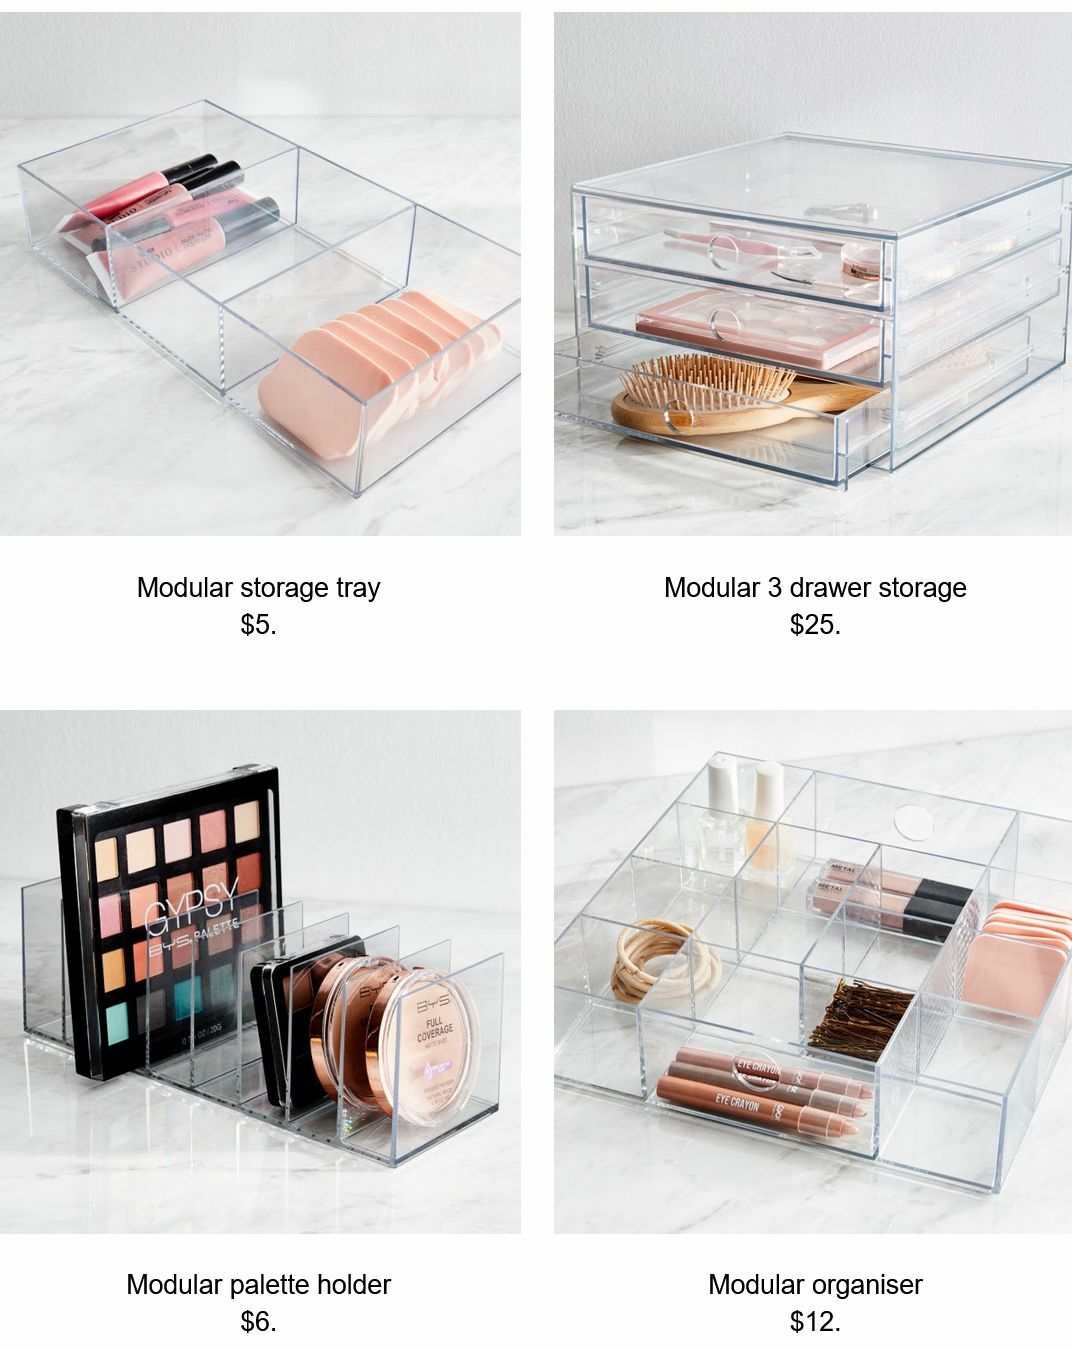 Kmart Bathroom Storage Catalogues from 18 January